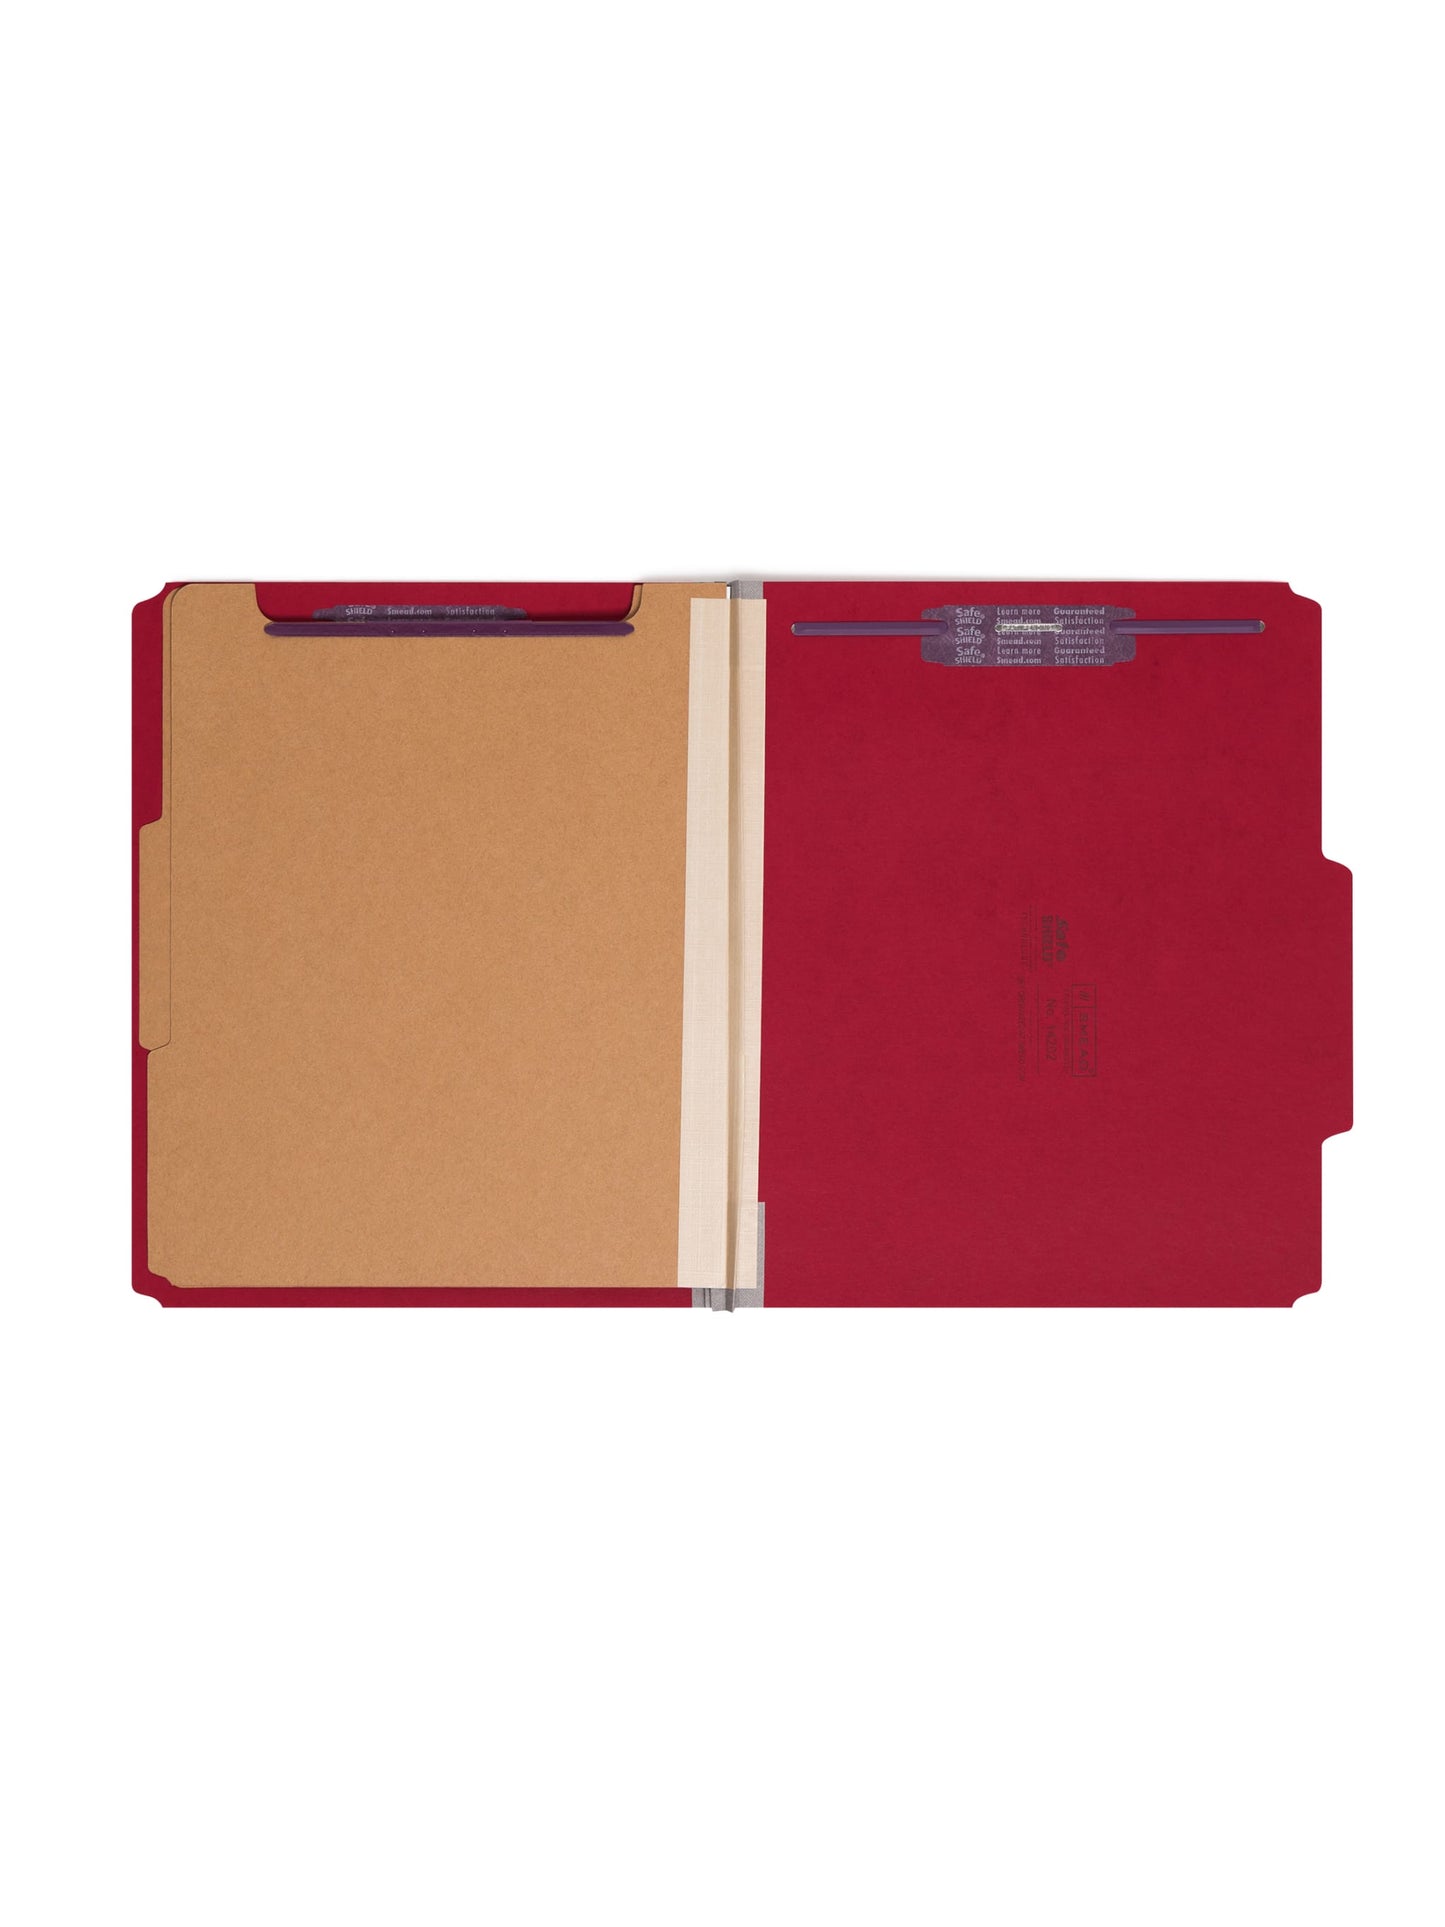 SafeSHIELD® Premium Pressboard Classification File Folders, 2 Dividers, 2 inch Expansion, 2/5-Cut Tab, Bright Red Color, Letter Size, Set of 0, 30086486142022